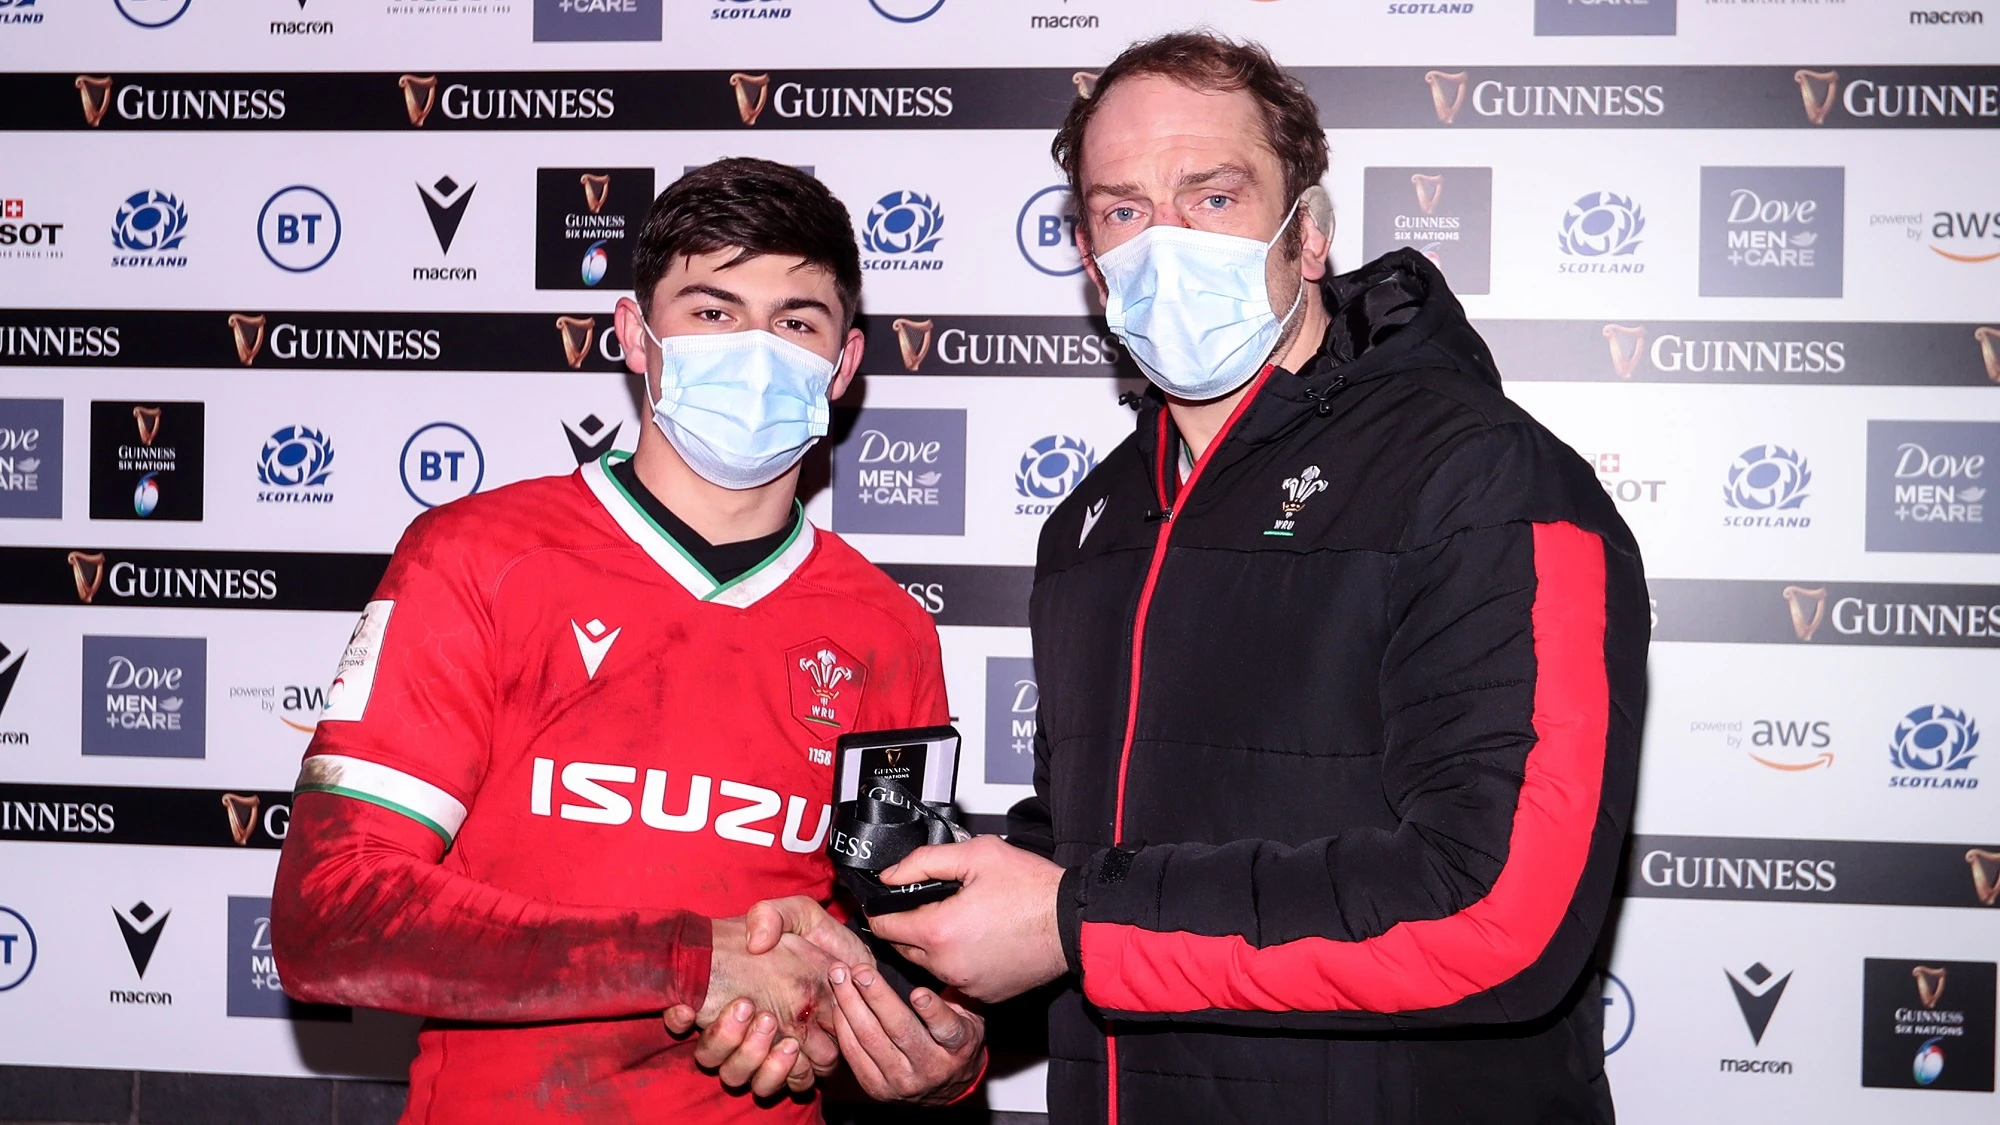 Louis Rees-Zammit is presented with the Guinness Six Nations Player of the match award by Alun Wyn Jones 13/2/2021